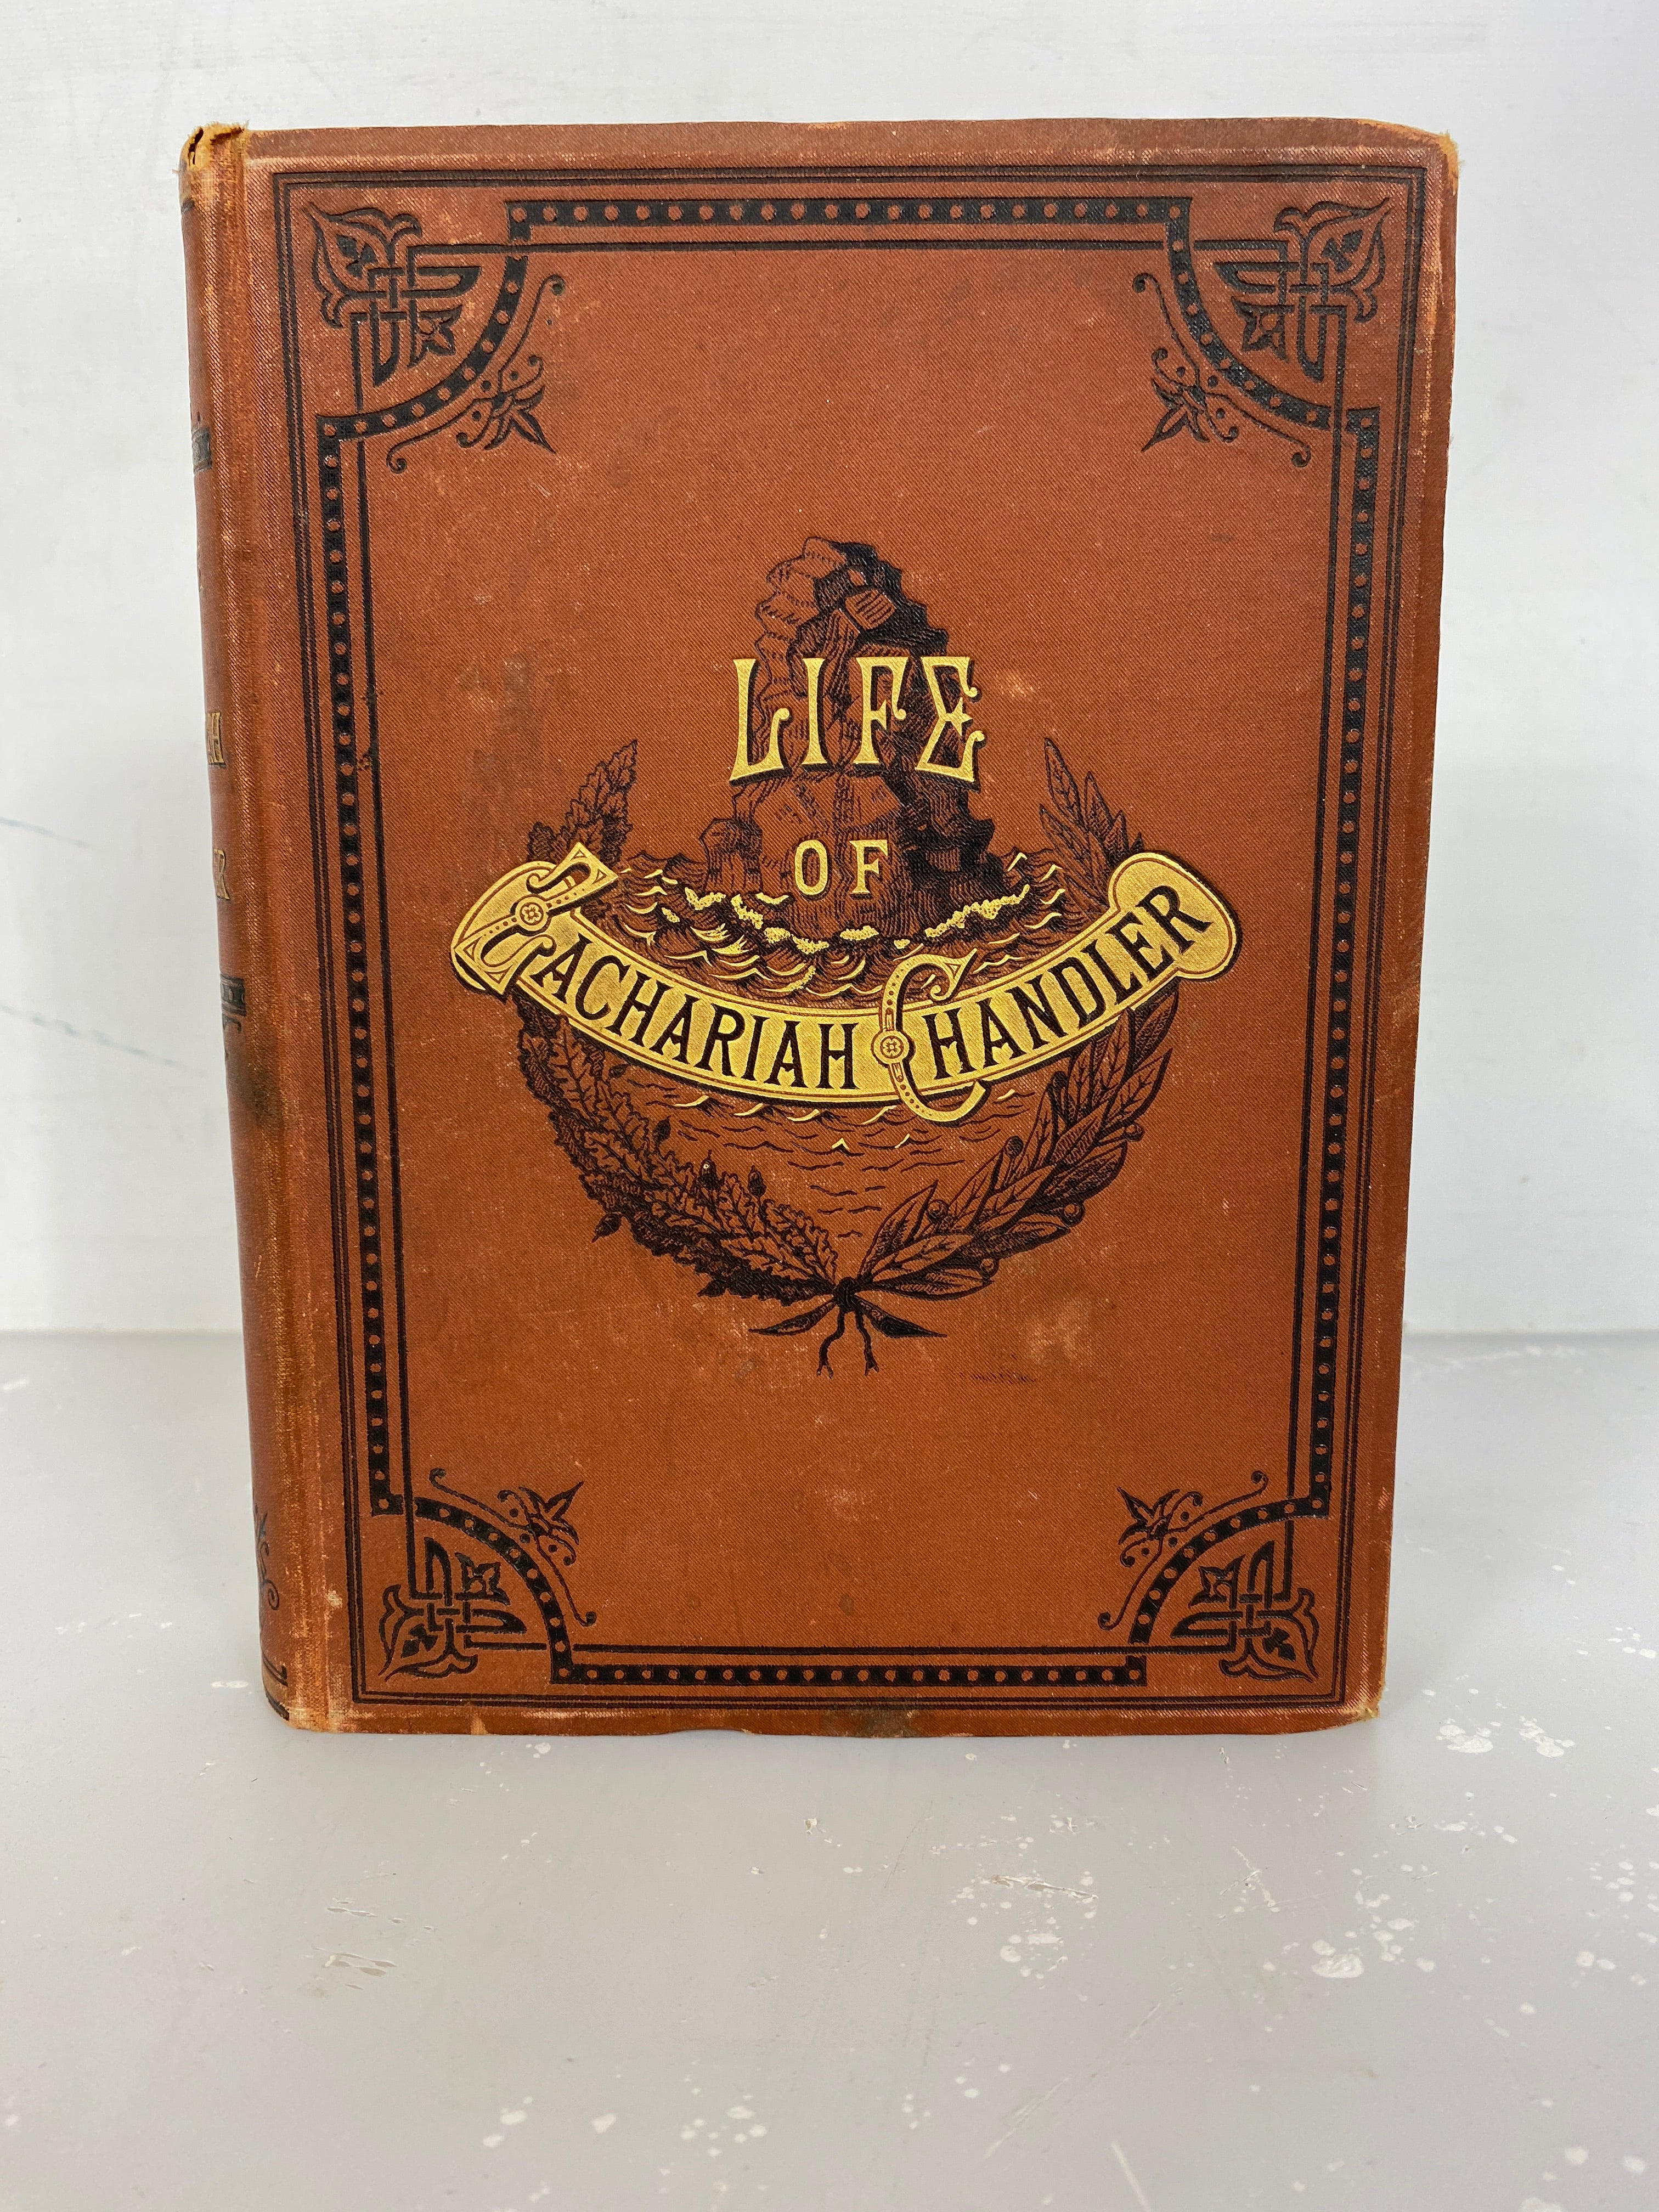 The Detroit Post and Tribune's Zachariah Chandler: An Outline Sketch of His Life and Public Services First Edition 1880 HC